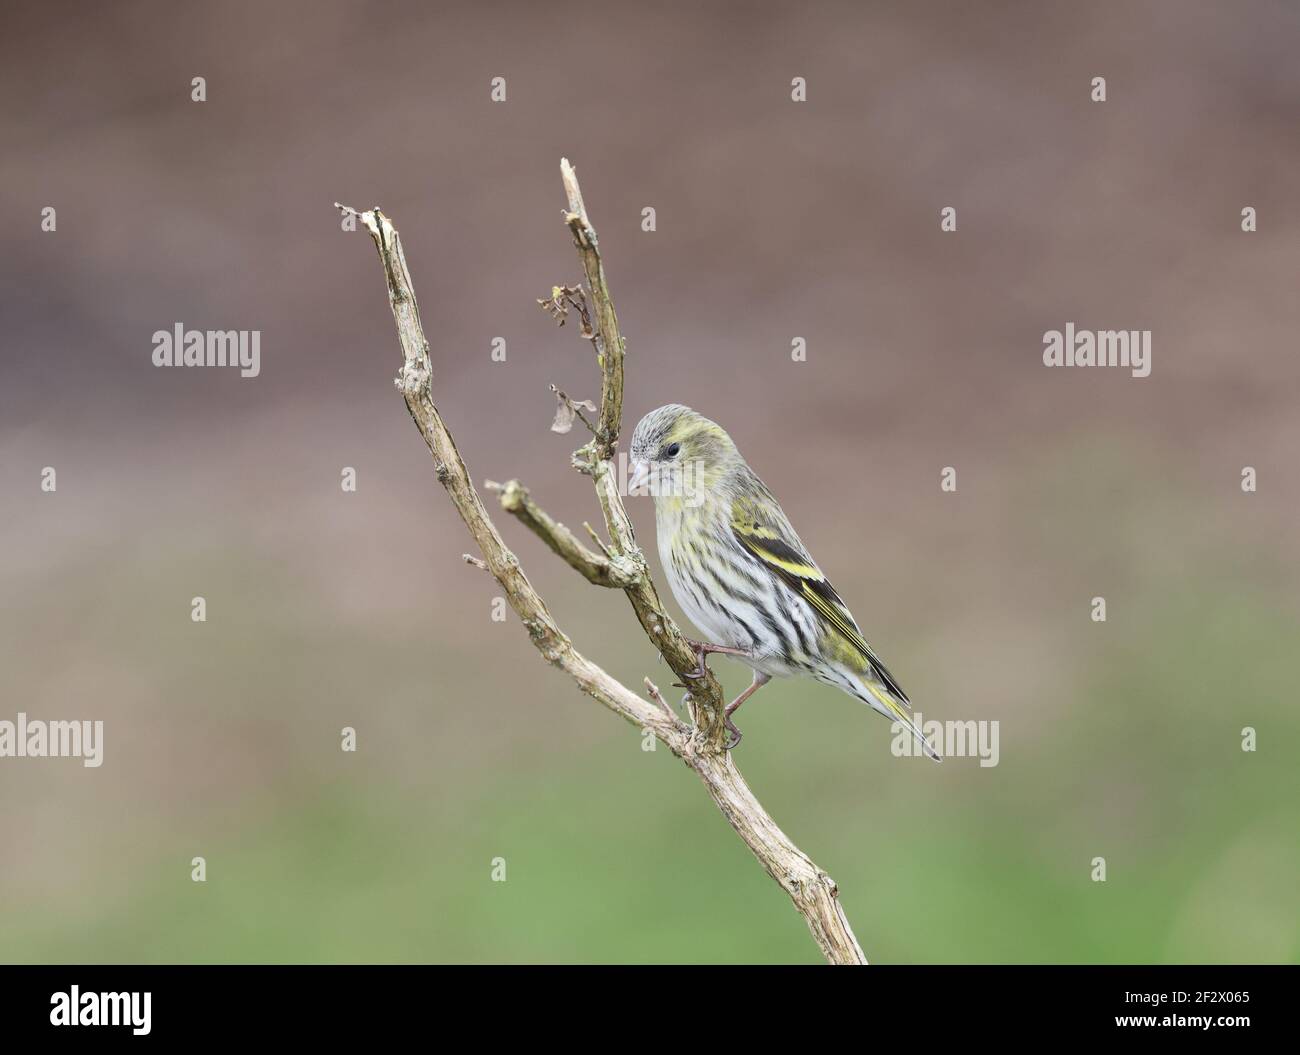 Siskin, Carduelis spinus, female European perched on a branch. Wales 2021 Stock Photo